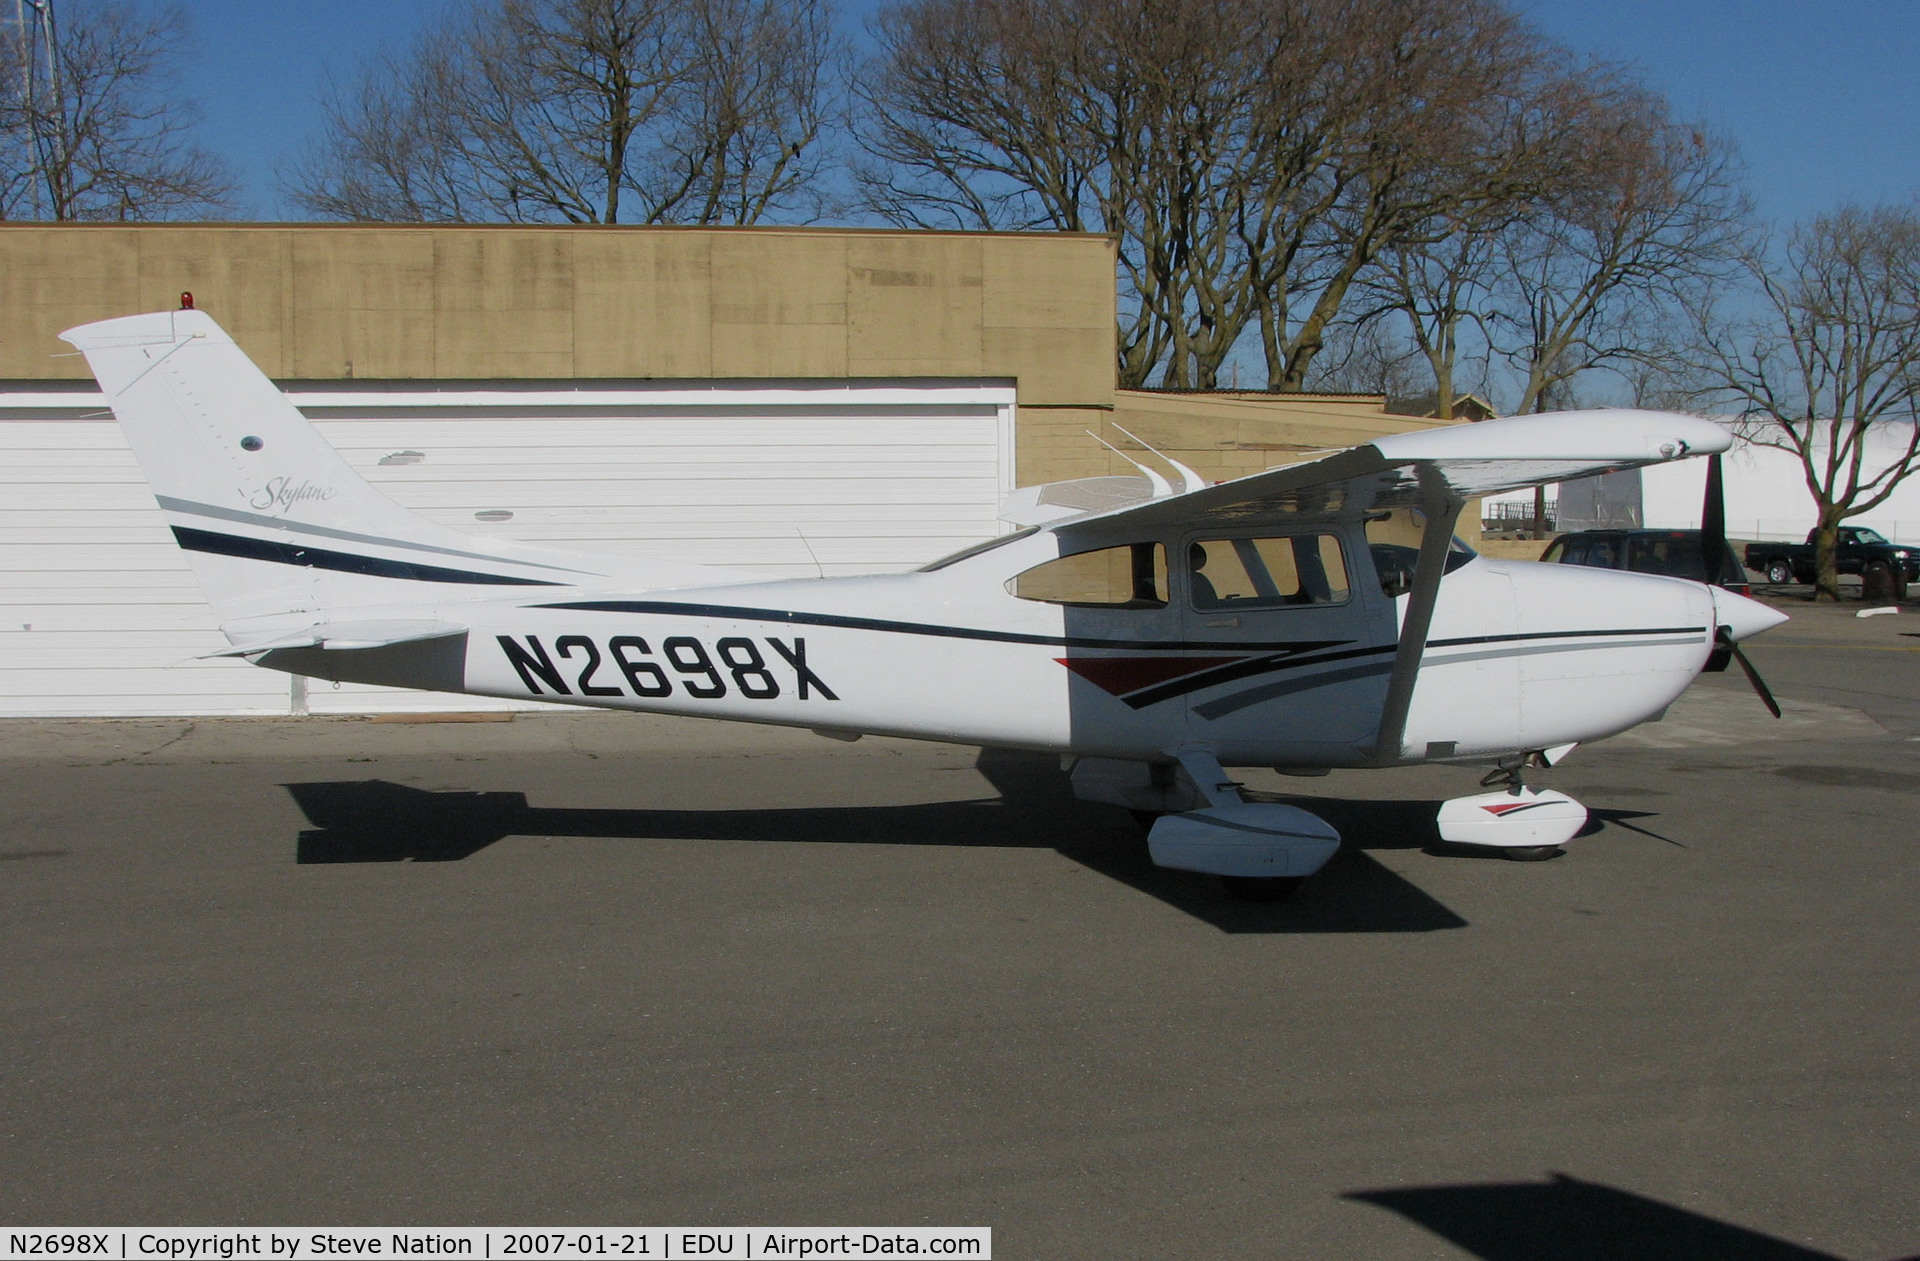 N2698X, 1998 Cessna 182S Skylane C/N 18280318, 1998 Cessna 182S Skylane in for maintenance  @ University Airport, Davis, CA (now registered to private owner in Hondo, TX and current as of August 2017)